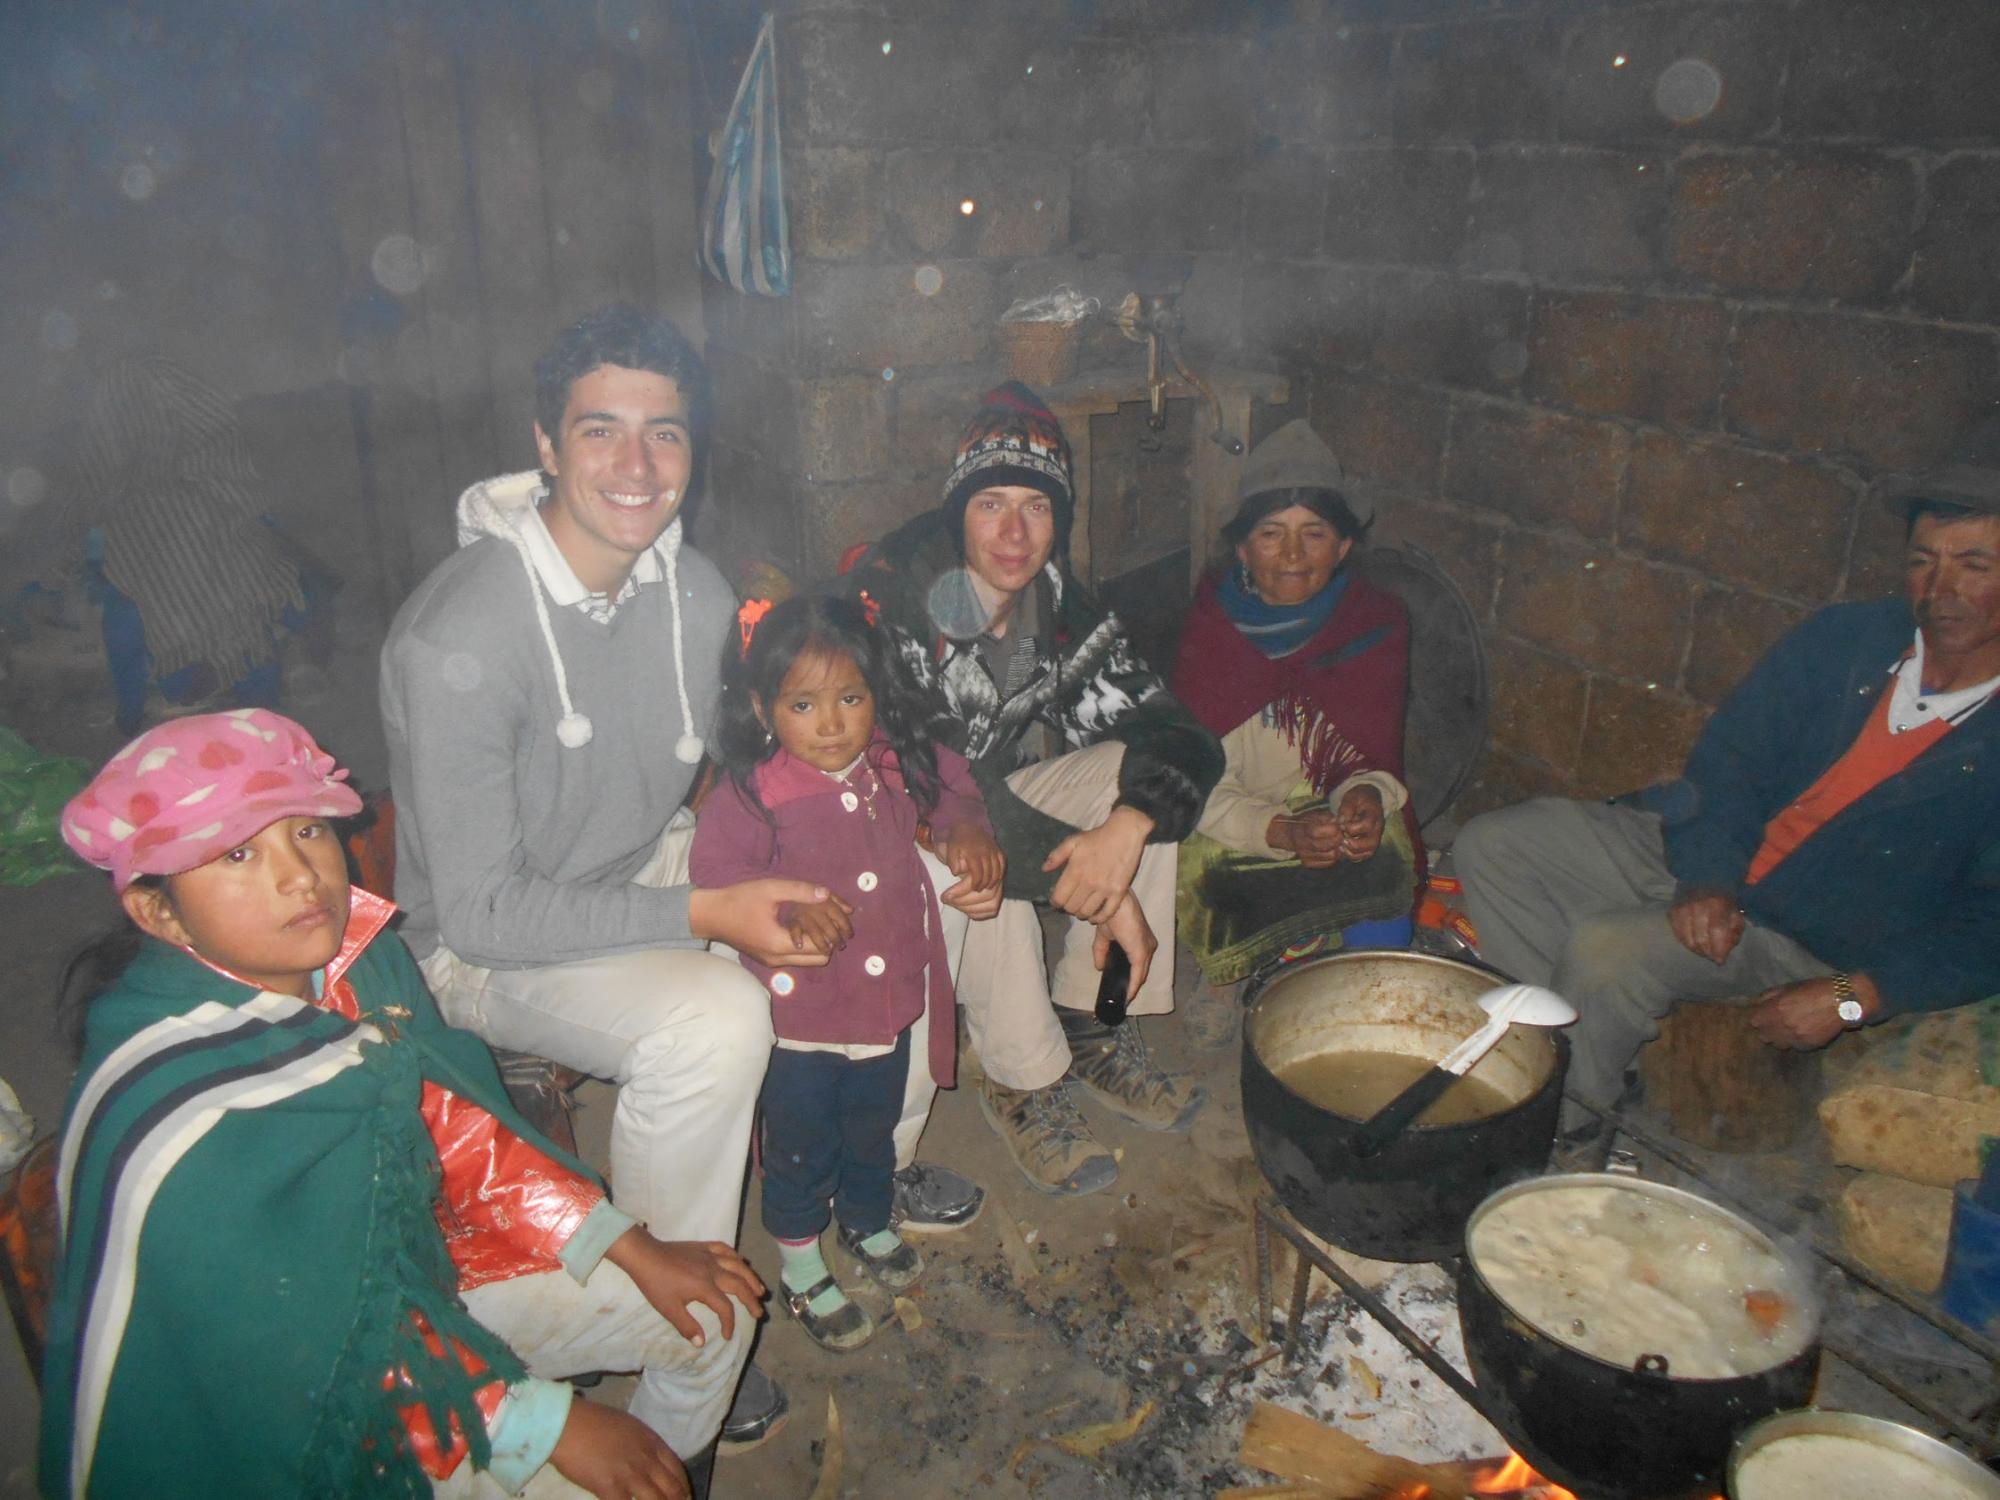 Cameron in Ecuador having dinner with friends